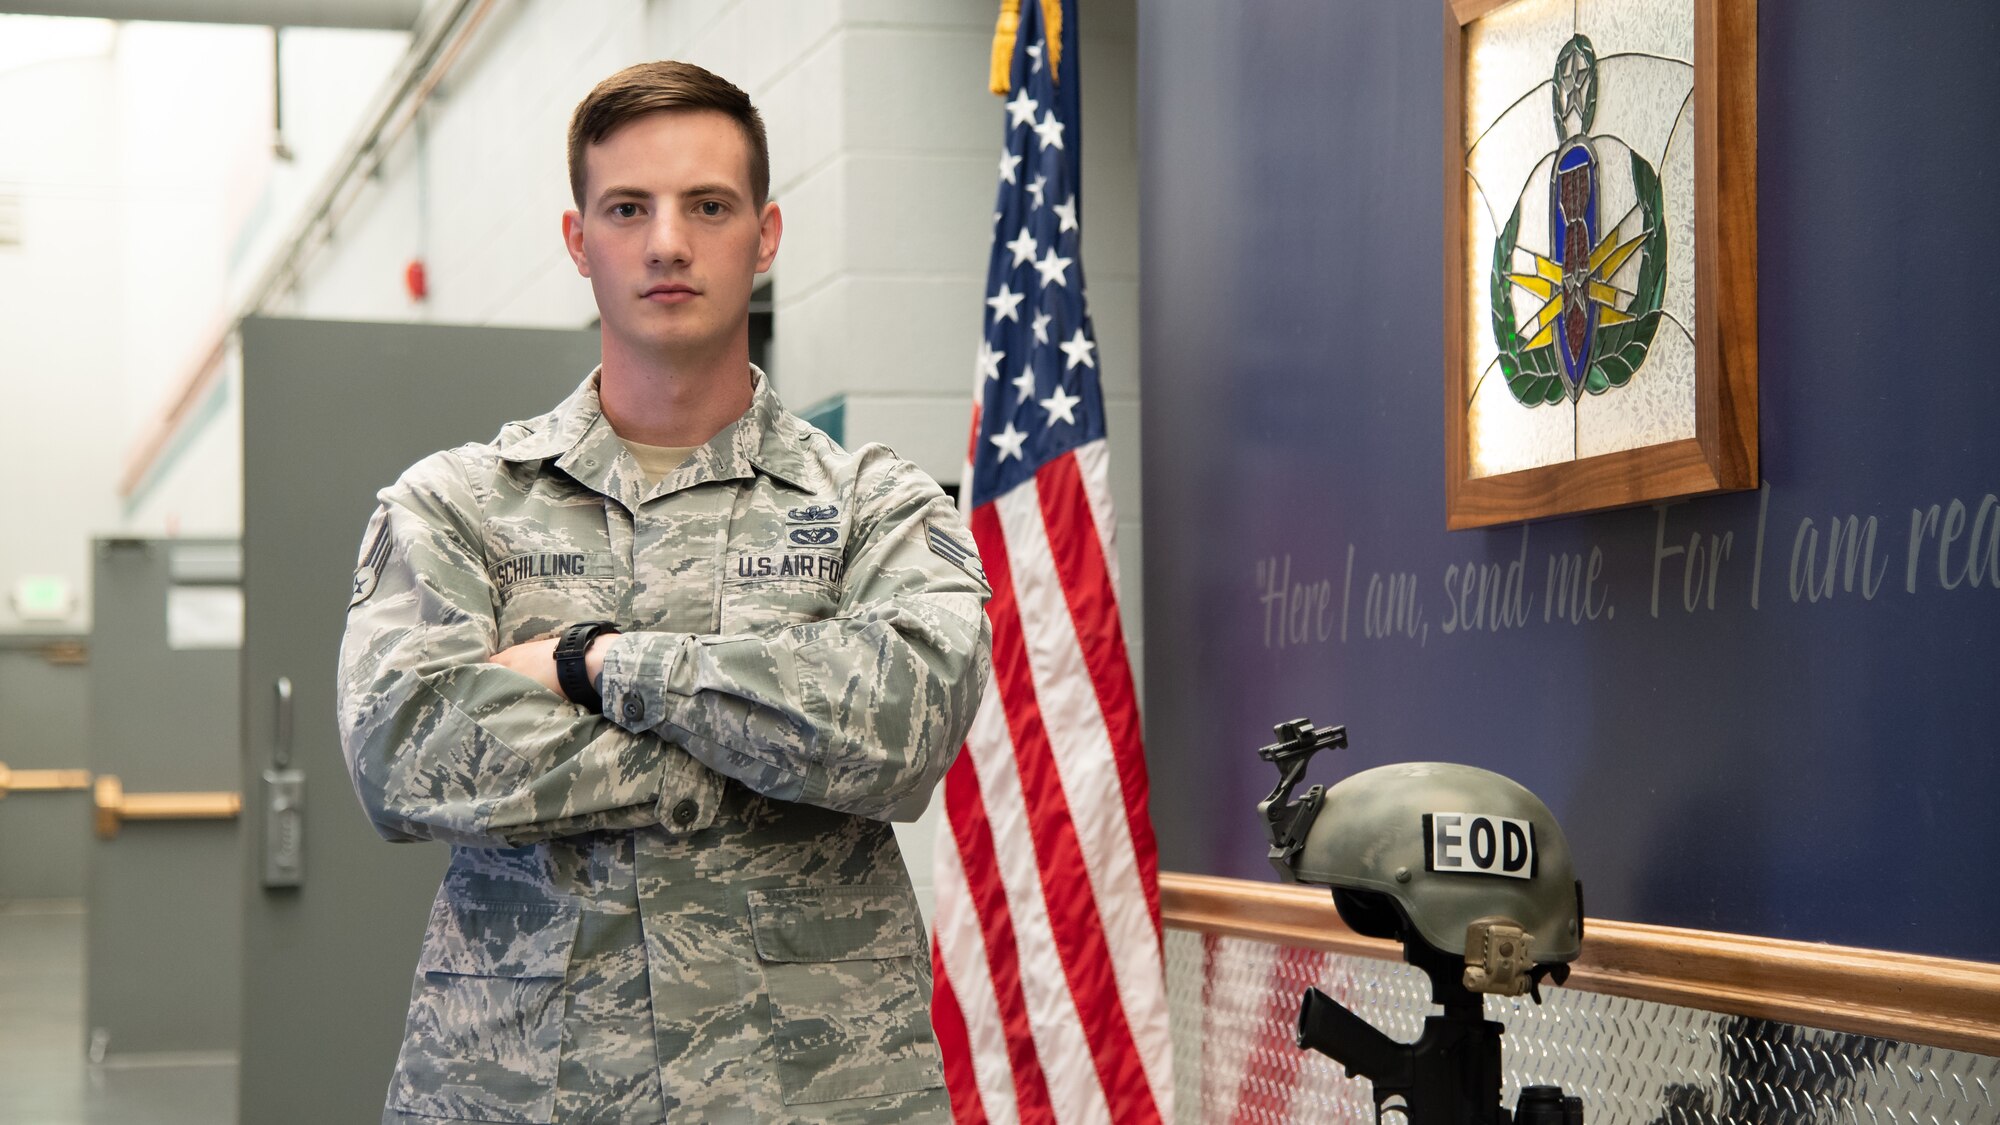 Senior Airman Patrick Schilling, an explosive ordnance disposal technician at Hill Air Force Base, was recently named one of the Air Force's 12 Outstanding Airmen of the Year. Annually, the Air Force selects 12 enlisted Airmen from various career fields based on superior leadership, job performance and personal achievements. (U.S. Air Force photo by R. Nial Bradshaw)